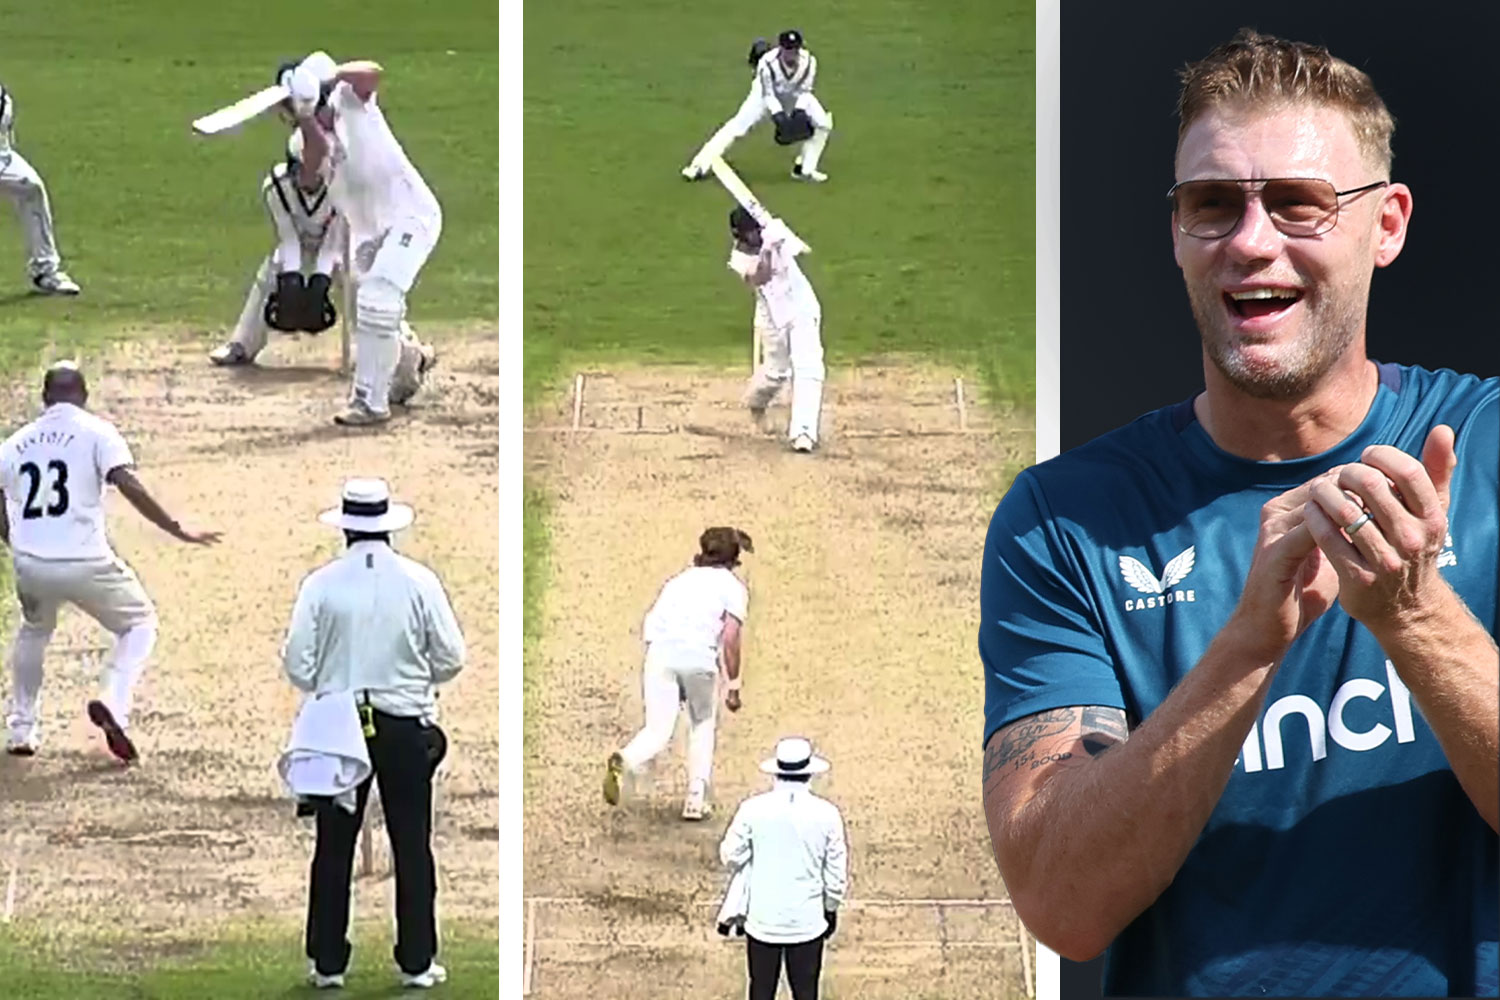 Watch: Rocky Flintoff smashes century with uncanny resemblance to dad